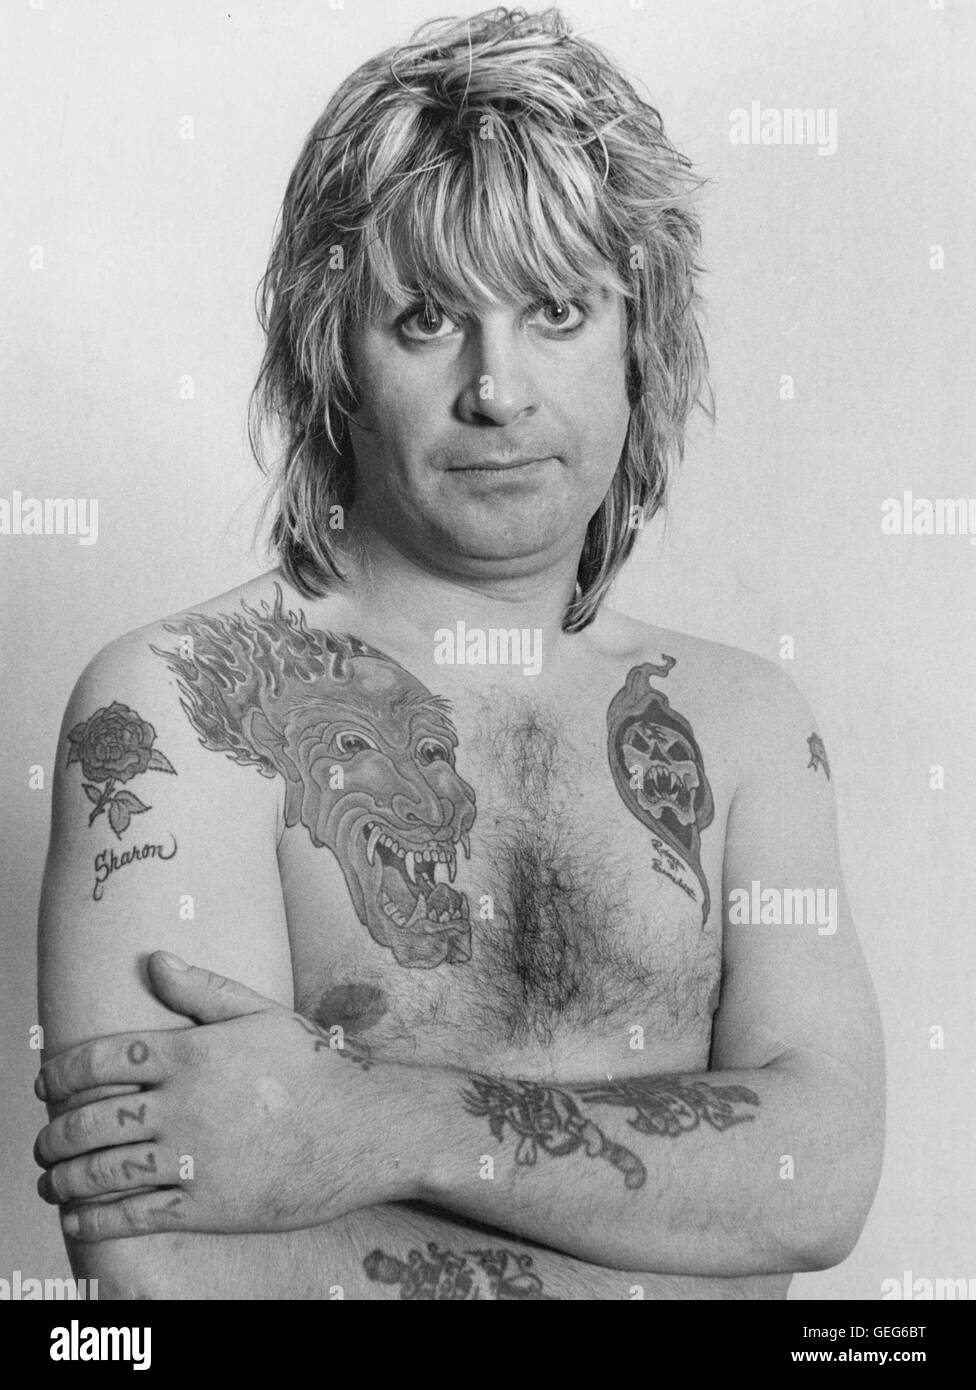 John Michael 'Ozzy' Osbourne (born 3 December 1948) is a British singer-songwriter, whose career has spanned four decades. © Scott Weiner / MediaPunch  *** Local Caption *** Stock Photo